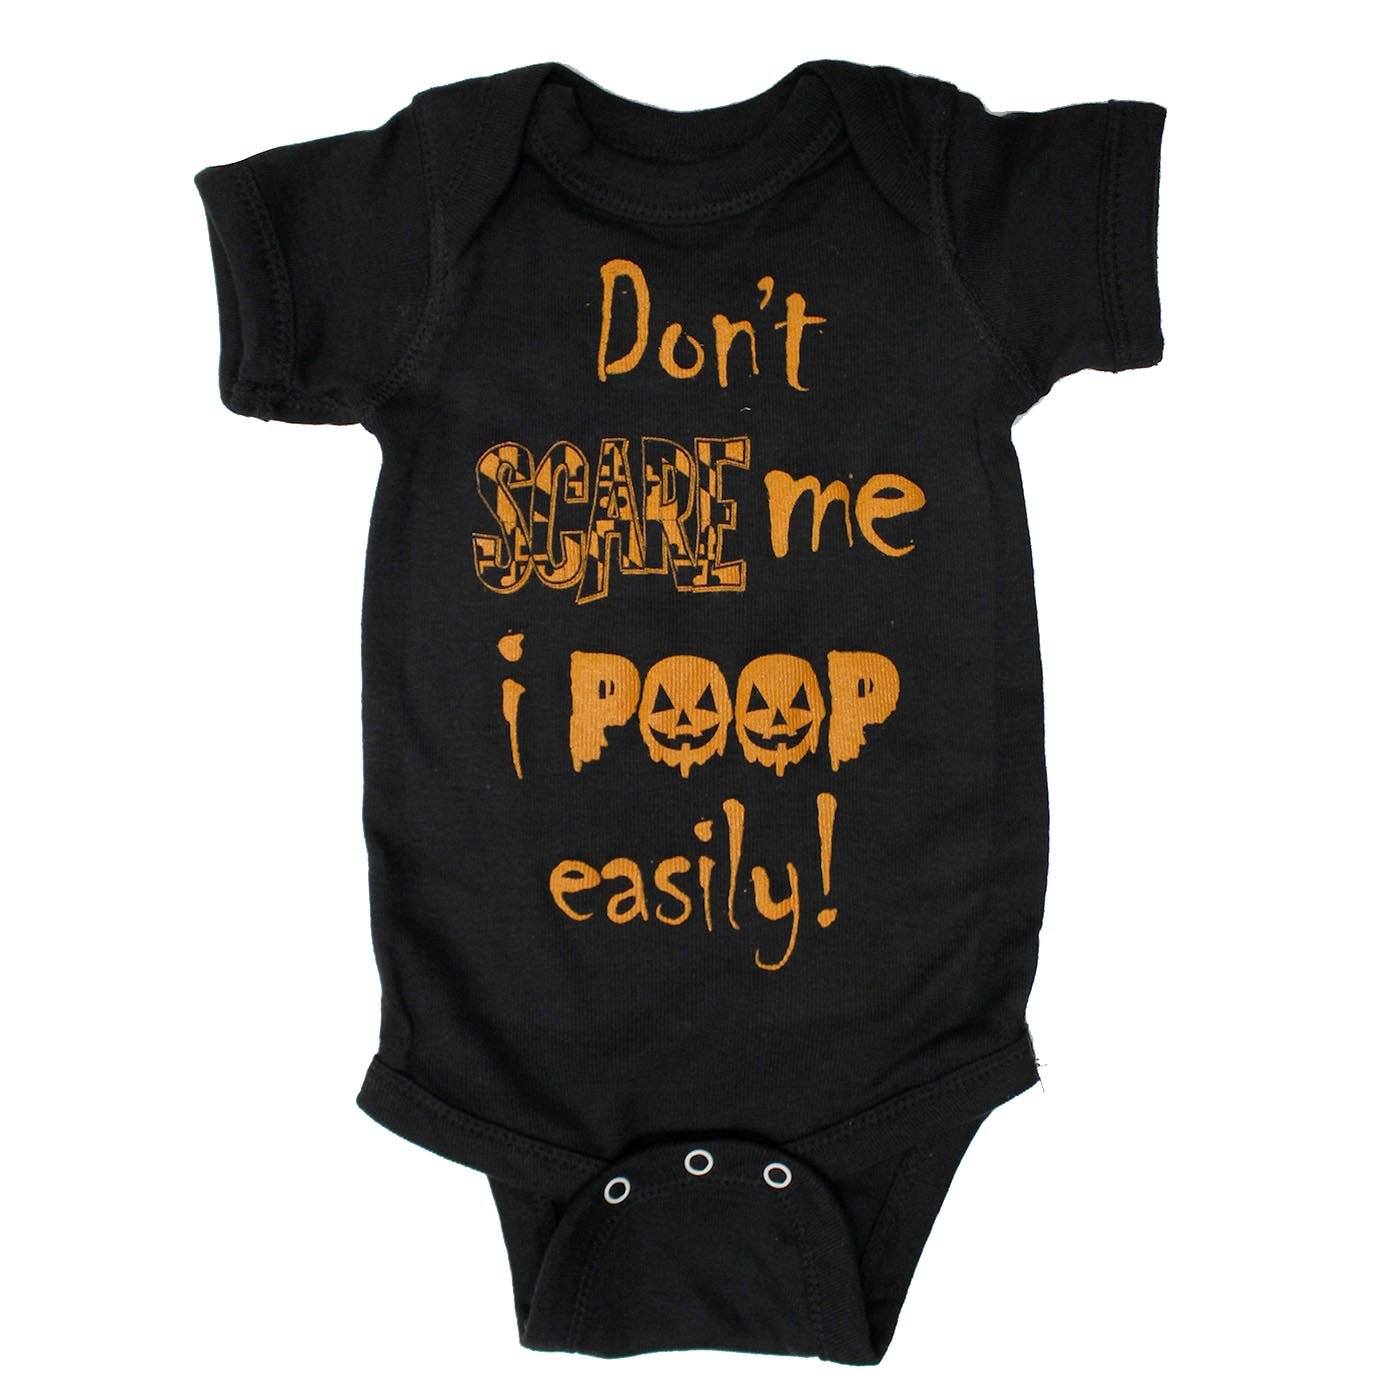 Don't Scare Me I Poop Easily (Black) / Baby Onesie - Route One Apparel